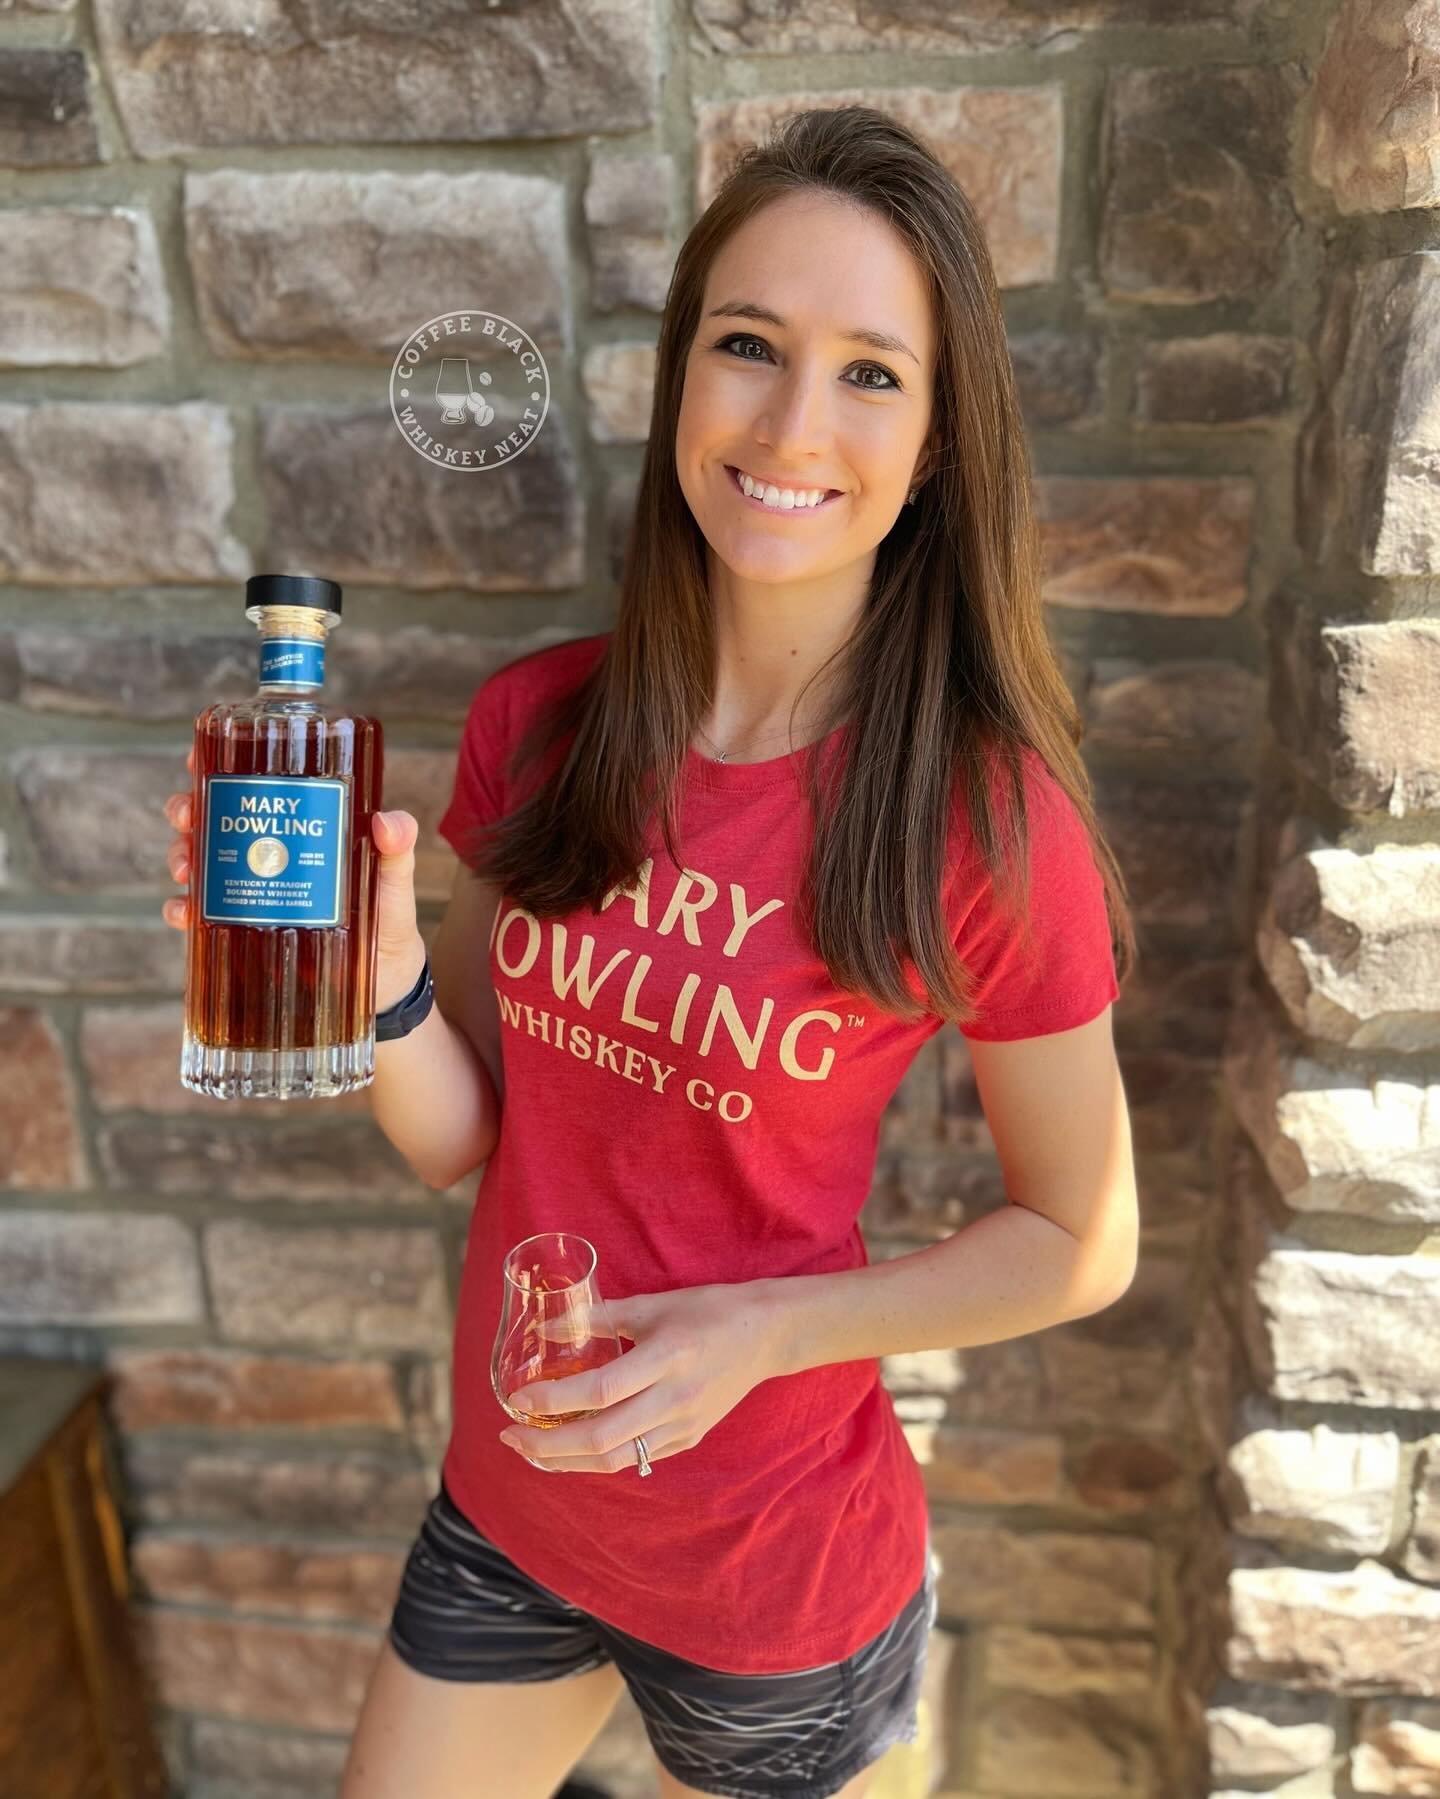 Wednesdays are for whiskey, right? 
@marydowlingwhiskey 
.
.
.
#whiskey #whiskeygram #whiskeywomen #whiskeywoman #whiskeyneat #whiskeytime #bourbonwhiskey #bourbon #bourbongram #bourbongirl #bourbonneat #bourbontime #whiskeywednesday #tequila #tequil